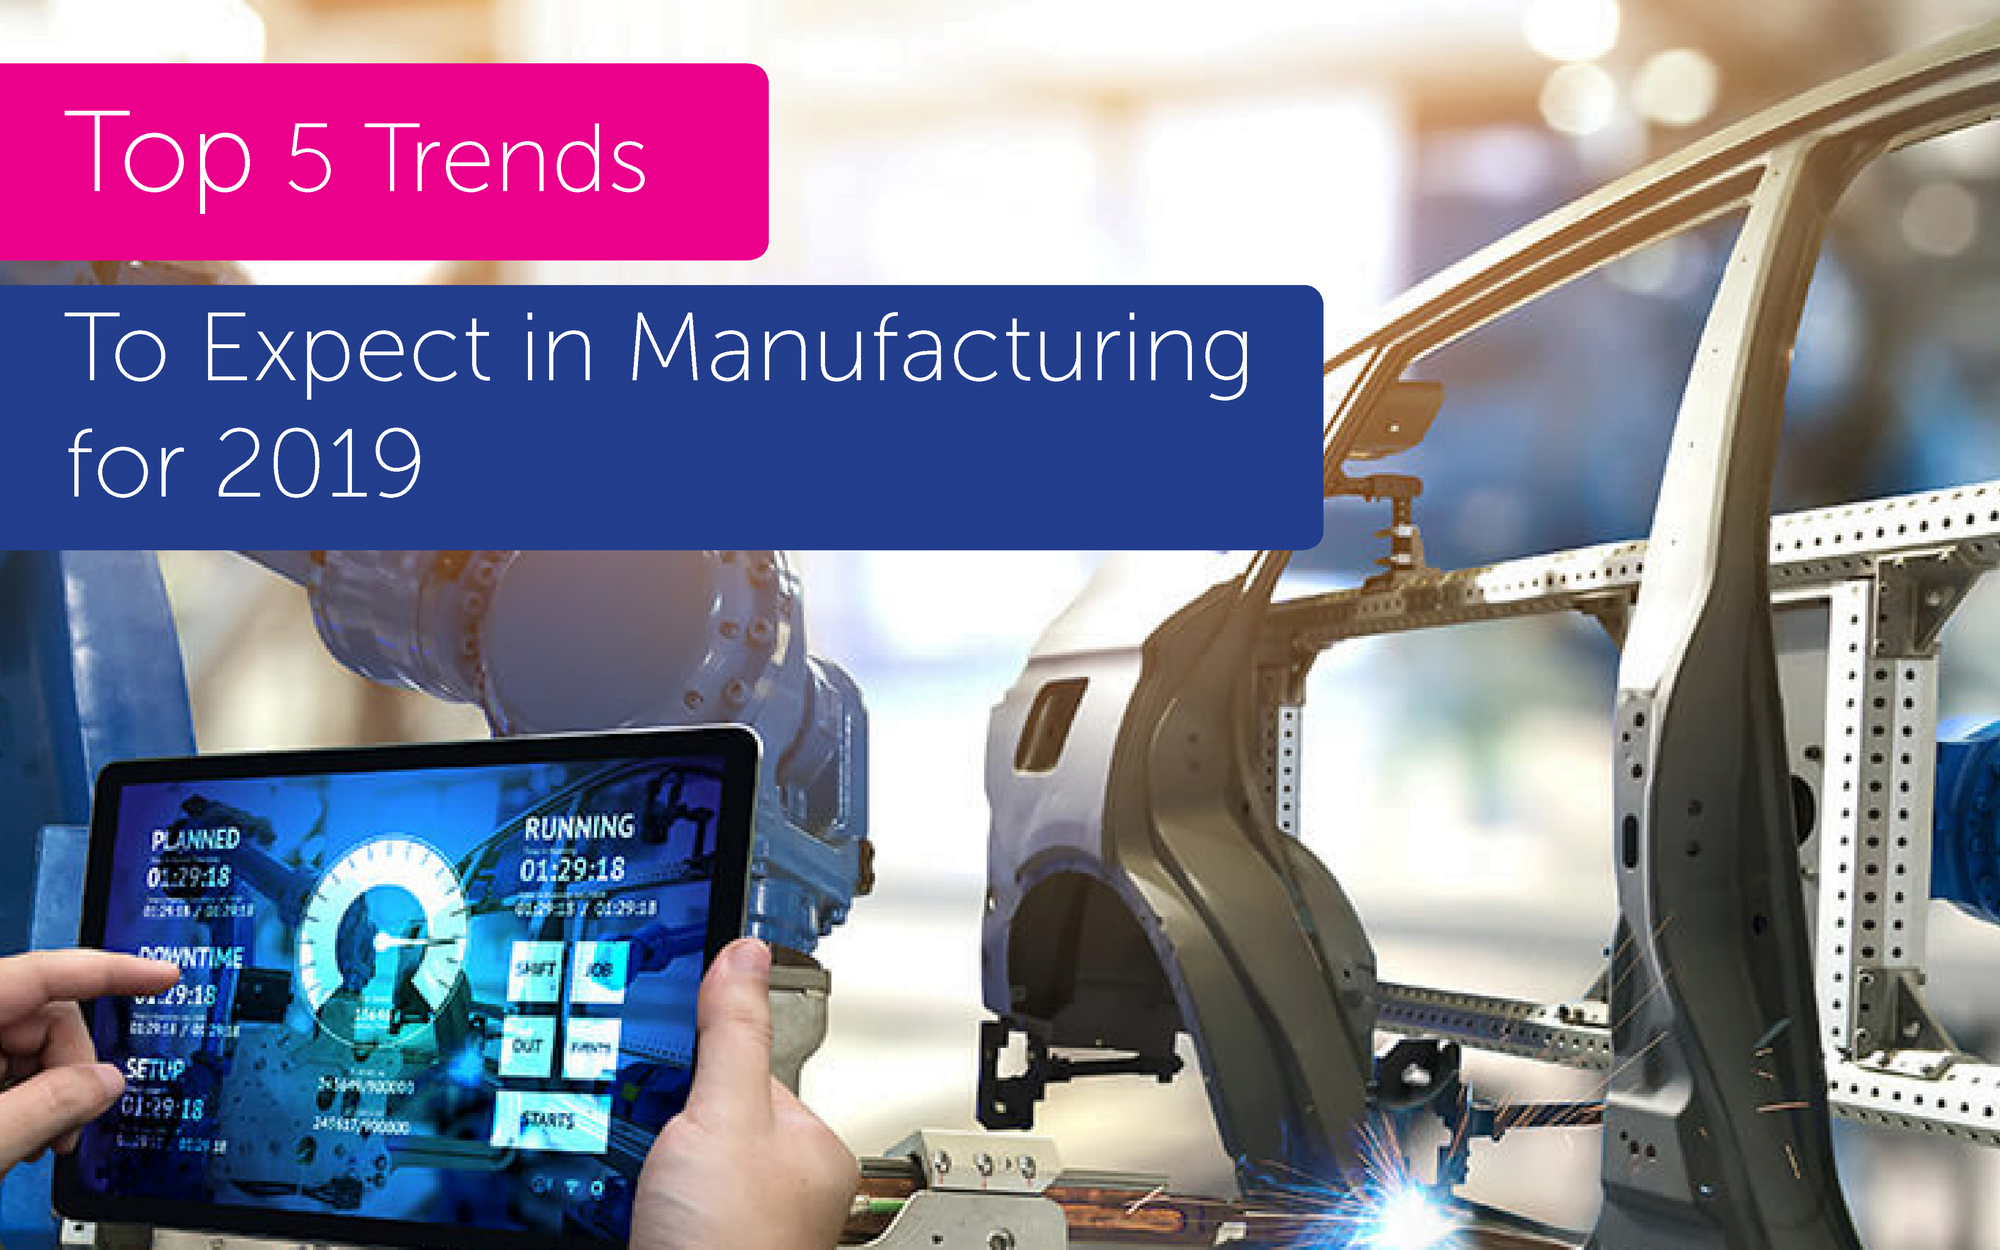 5 Top Manufacturing Trends to Expect in 2019